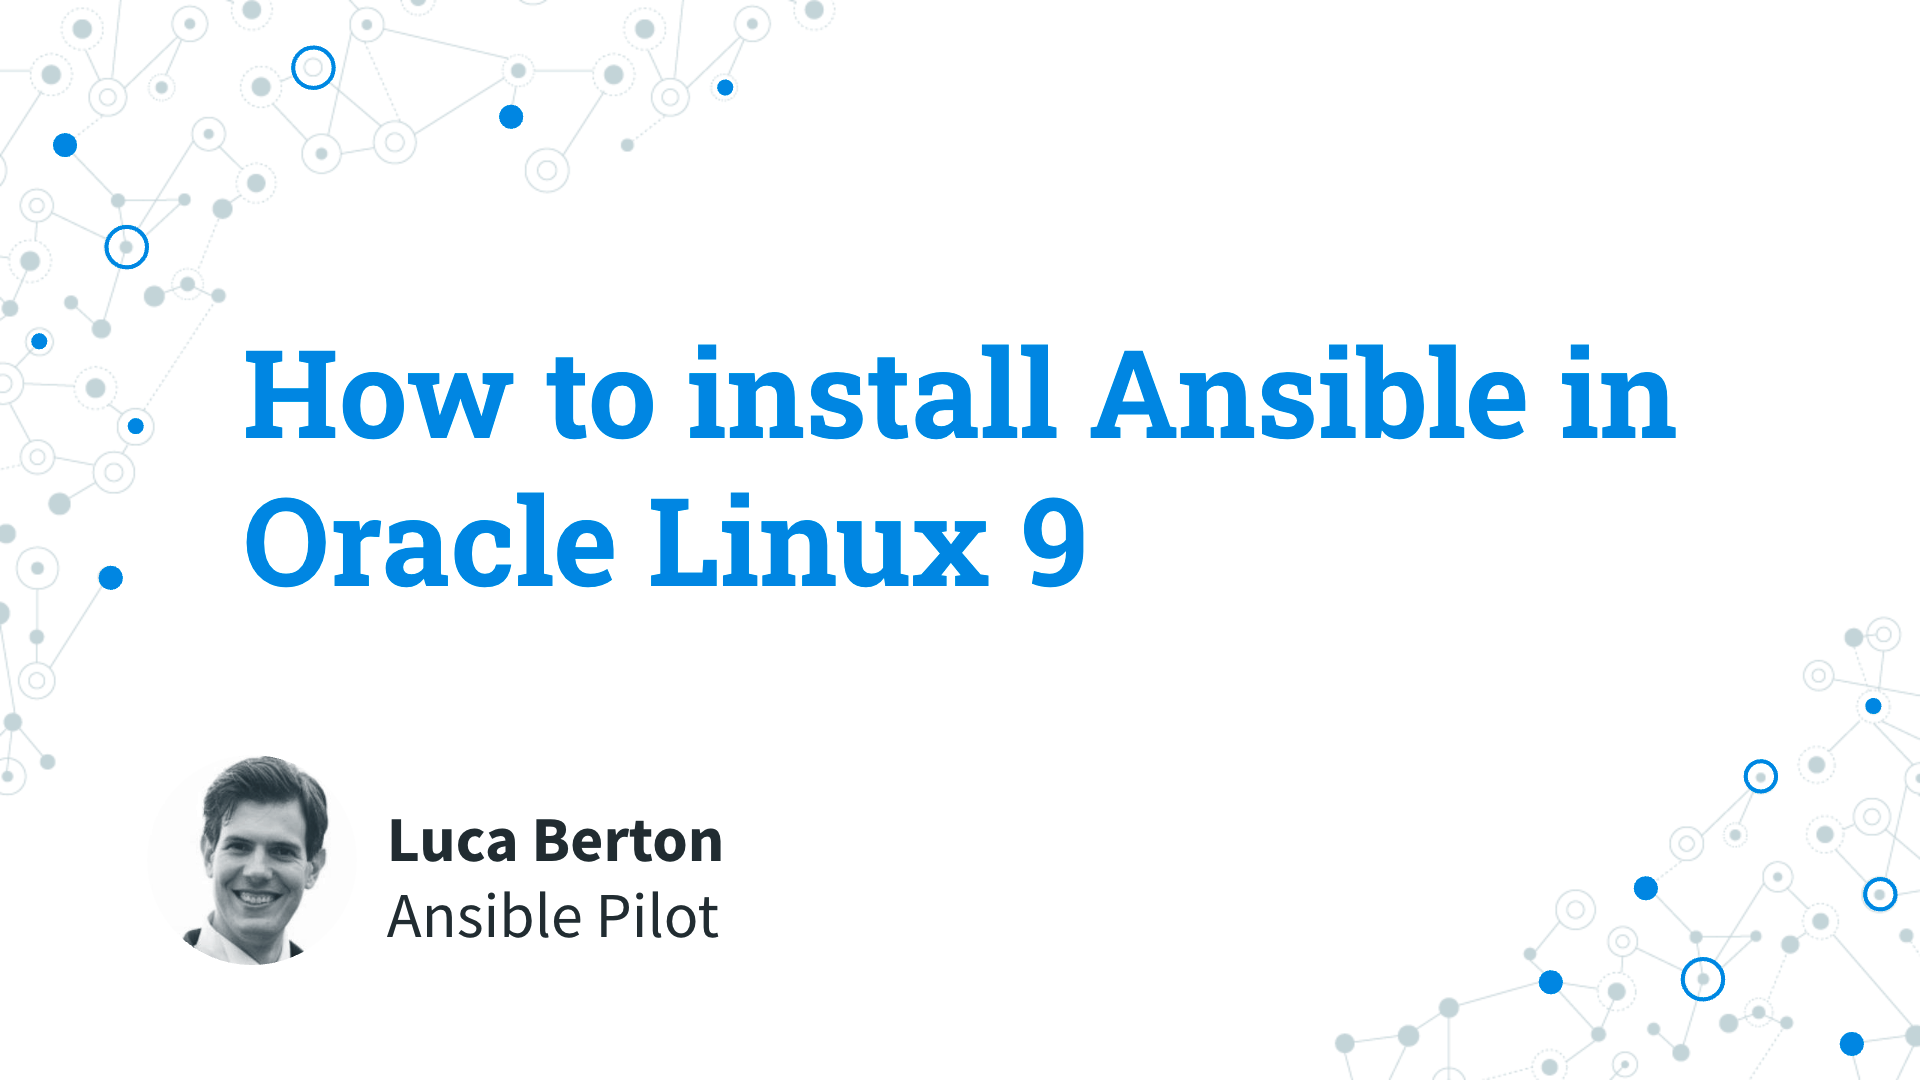 How to install Ansible in Oracle Linux 9 - Ansible install